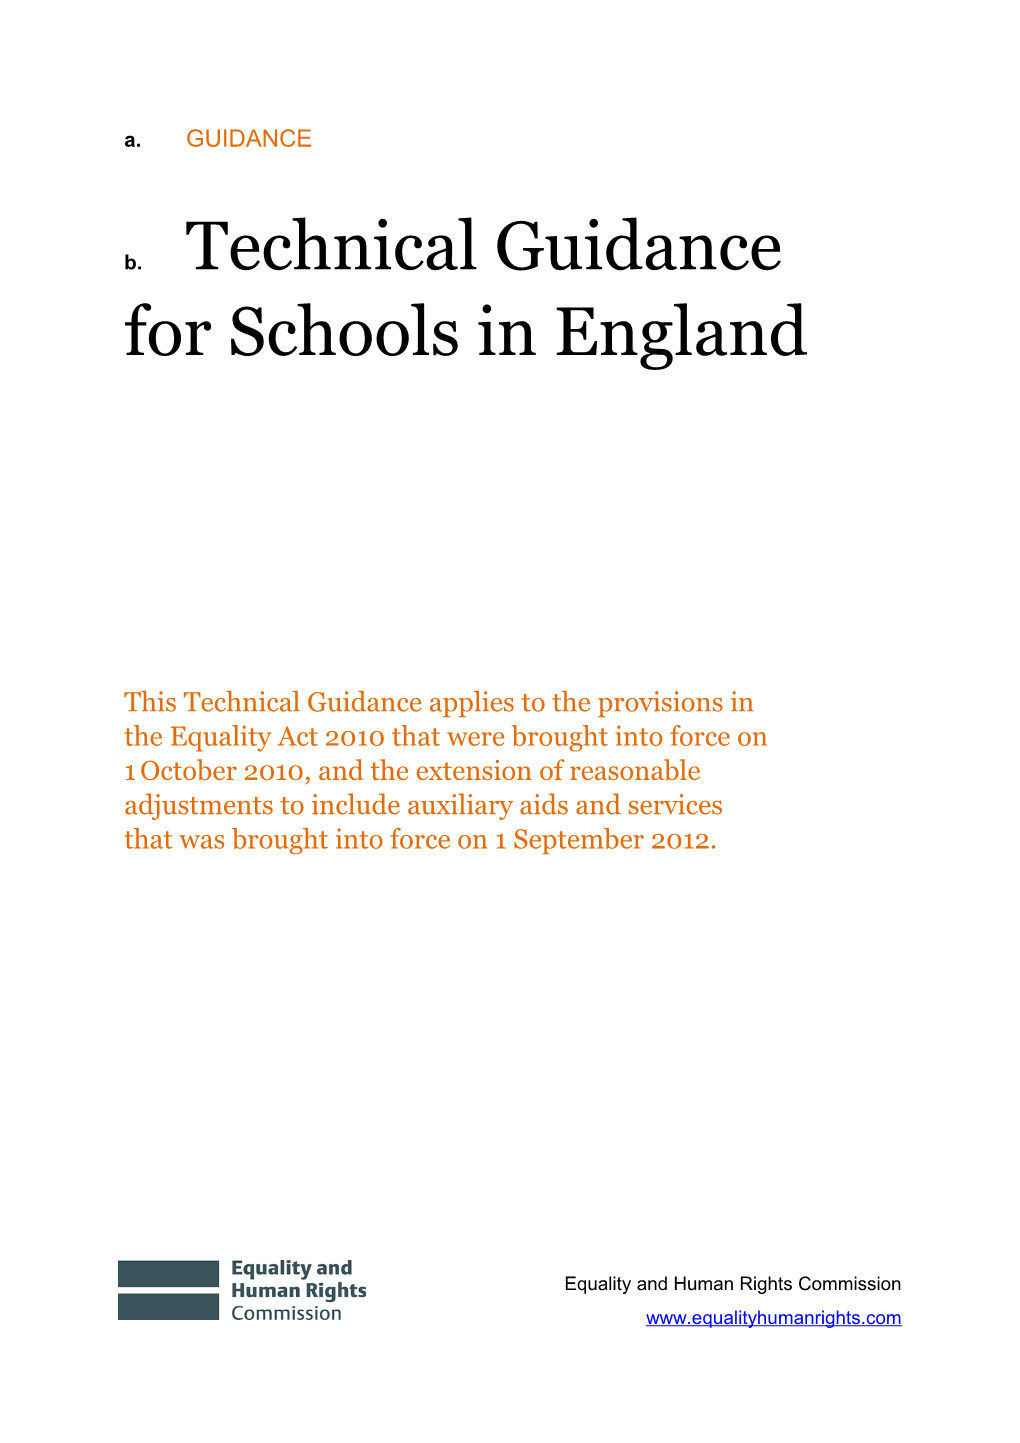 Technical Guidance for Schools in England